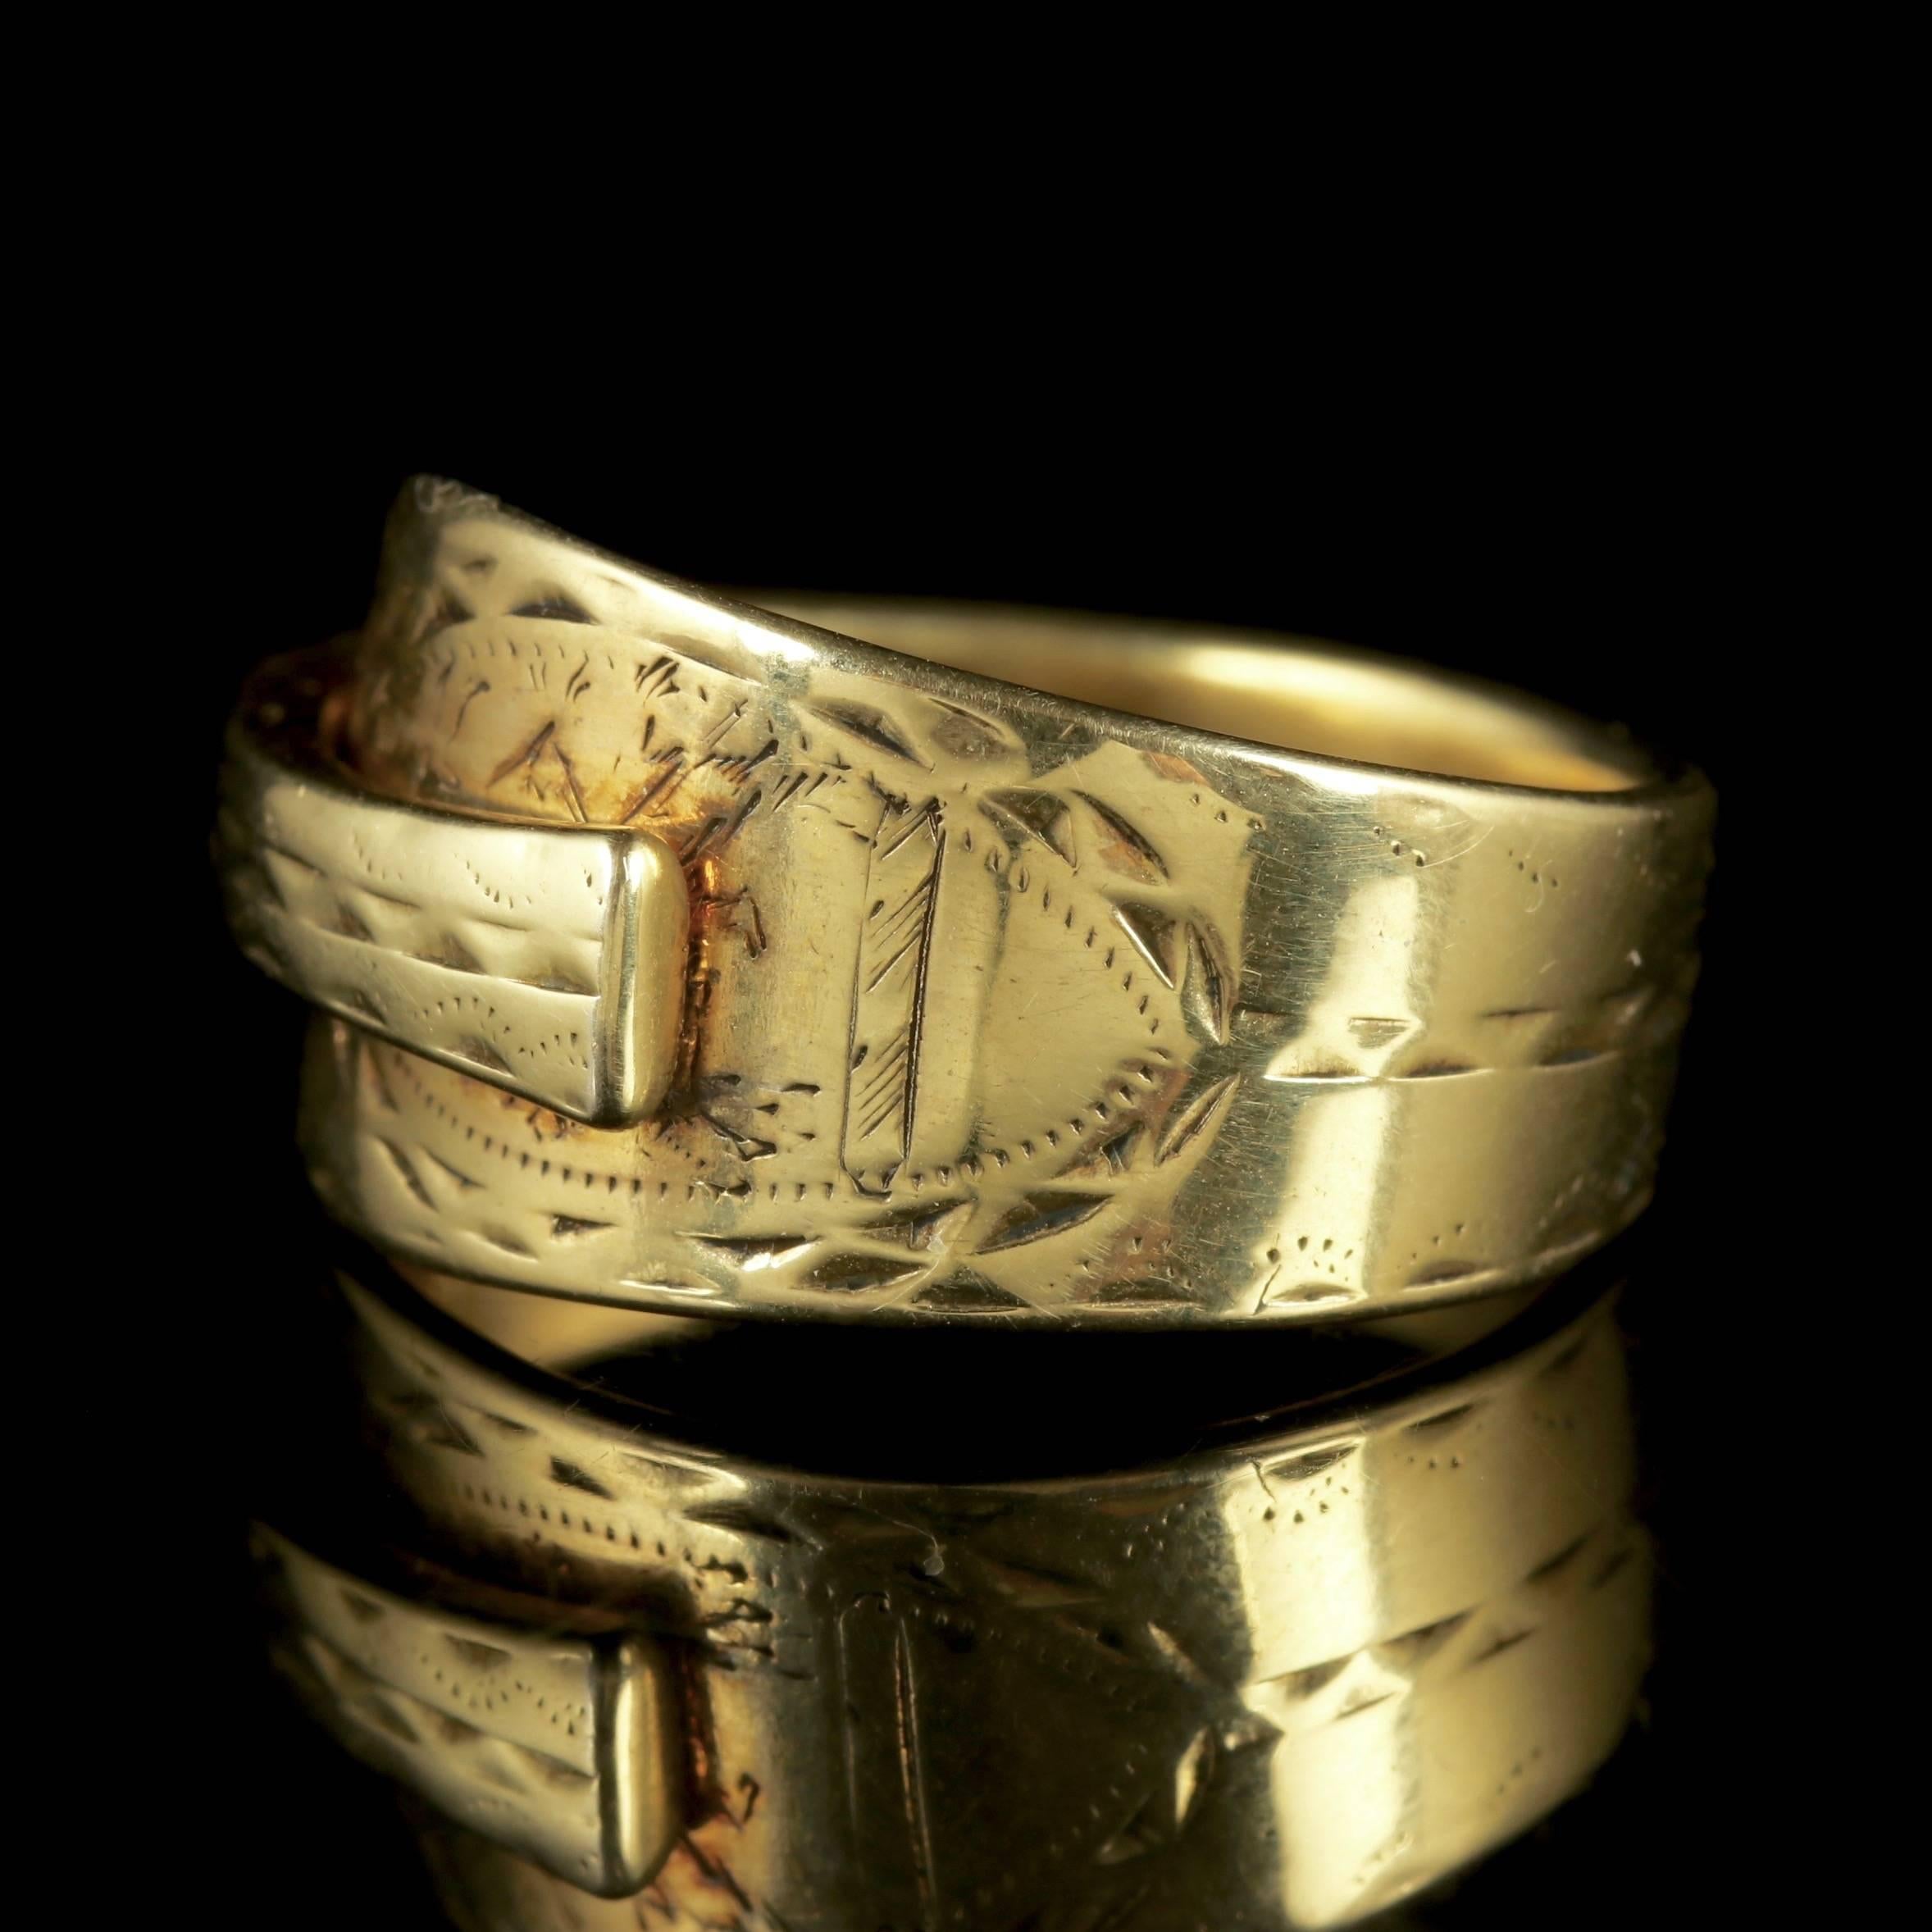 To read more please click continue reading below-

This beautiful antique 18ct Gold on Silver Spoon ring is Georgian, Circa 1800.

Due to its age, Georgian jewellery is quite rare, with some pieces almost three hundred years old. From 1714 until